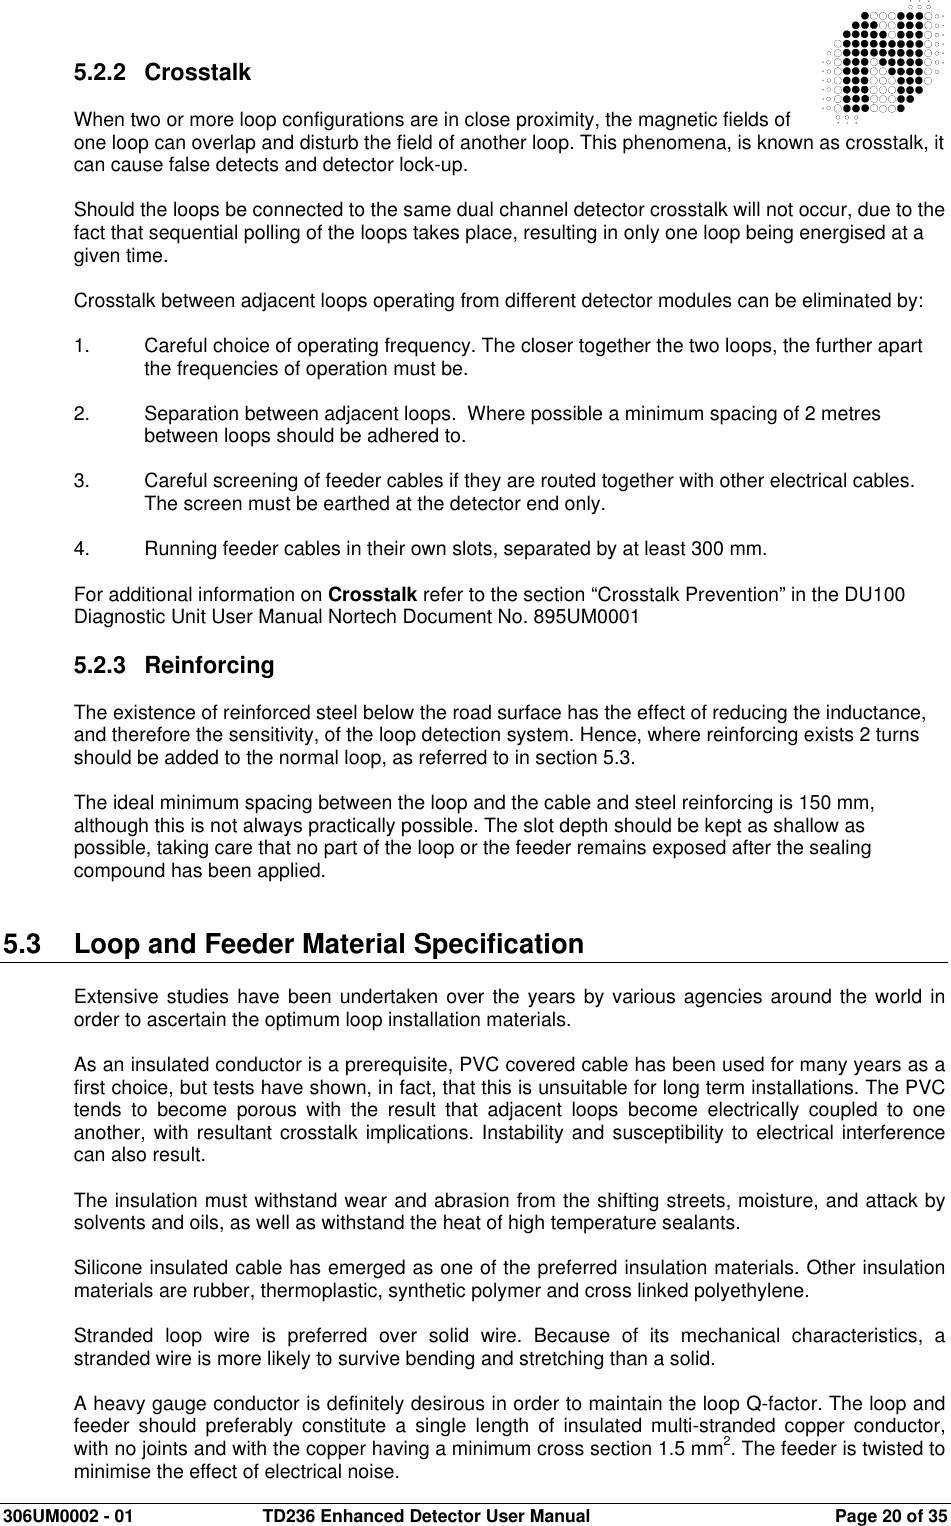  306UM0002 - 01  TD236 Enhanced Detector User Manual   Page 20 of 35  5.2.2  Crosstalk  When two or more loop configurations are in close proximity, the magnetic fields of one loop can overlap and disturb the field of another loop. This phenomena, is known as crosstalk, it can cause false detects and detector lock-up.    Should the loops be connected to the same dual channel detector crosstalk will not occur, due to the fact that sequential polling of the loops takes place, resulting in only one loop being energised at a given time.  Crosstalk between adjacent loops operating from different detector modules can be eliminated by:  1.  Careful choice of operating frequency. The closer together the two loops, the further apart the frequencies of operation must be.  2.  Separation between adjacent loops.  Where possible a minimum spacing of 2 metres between loops should be adhered to.  3.  Careful screening of feeder cables if they are routed together with other electrical cables. The screen must be earthed at the detector end only.  4.  Running feeder cables in their own slots, separated by at least 300 mm.  For additional information on Crosstalk refer to the section “Crosstalk Prevention” in the DU100 Diagnostic Unit User Manual Nortech Document No. 895UM0001  5.2.3  Reinforcing  The existence of reinforced steel below the road surface has the effect of reducing the inductance, and therefore the sensitivity, of the loop detection system. Hence, where reinforcing exists 2 turns should be added to the normal loop, as referred to in section 5.3.    The ideal minimum spacing between the loop and the cable and steel reinforcing is 150 mm, although this is not always practically possible. The slot depth should be kept as shallow as possible, taking care that no part of the loop or the feeder remains exposed after the sealing compound has been applied.   5.3  Loop and Feeder Material Specification  Extensive studies have  been undertaken over the years by various agencies around the world in order to ascertain the optimum loop installation materials.  As an insulated conductor is a prerequisite, PVC covered cable has been used for many years as a first choice, but tests have shown, in fact, that this is unsuitable for long term installations. The PVC tends  to  become  porous  with  the  result  that  adjacent  loops  become  electrically  coupled  to  one another, with resultant crosstalk implications. Instability and susceptibility to electrical interference can also result.  The insulation must withstand wear and abrasion from the shifting streets, moisture, and attack by solvents and oils, as well as withstand the heat of high temperature sealants.  Silicone insulated cable has emerged as one of the preferred insulation materials. Other insulation materials are rubber, thermoplastic, synthetic polymer and cross linked polyethylene.  Stranded  loop  wire  is  preferred  over  solid  wire.  Because  of  its  mechanical  characteristics,  a stranded wire is more likely to survive bending and stretching than a solid.  A heavy gauge conductor is definitely desirous in order to maintain the loop Q-factor. The loop and feeder  should  preferably  constitute  a  single  length  of  insulated  multi-stranded  copper  conductor, with no joints and with the copper having a minimum cross section 1.5 mm2. The feeder is twisted to minimise the effect of electrical noise. 